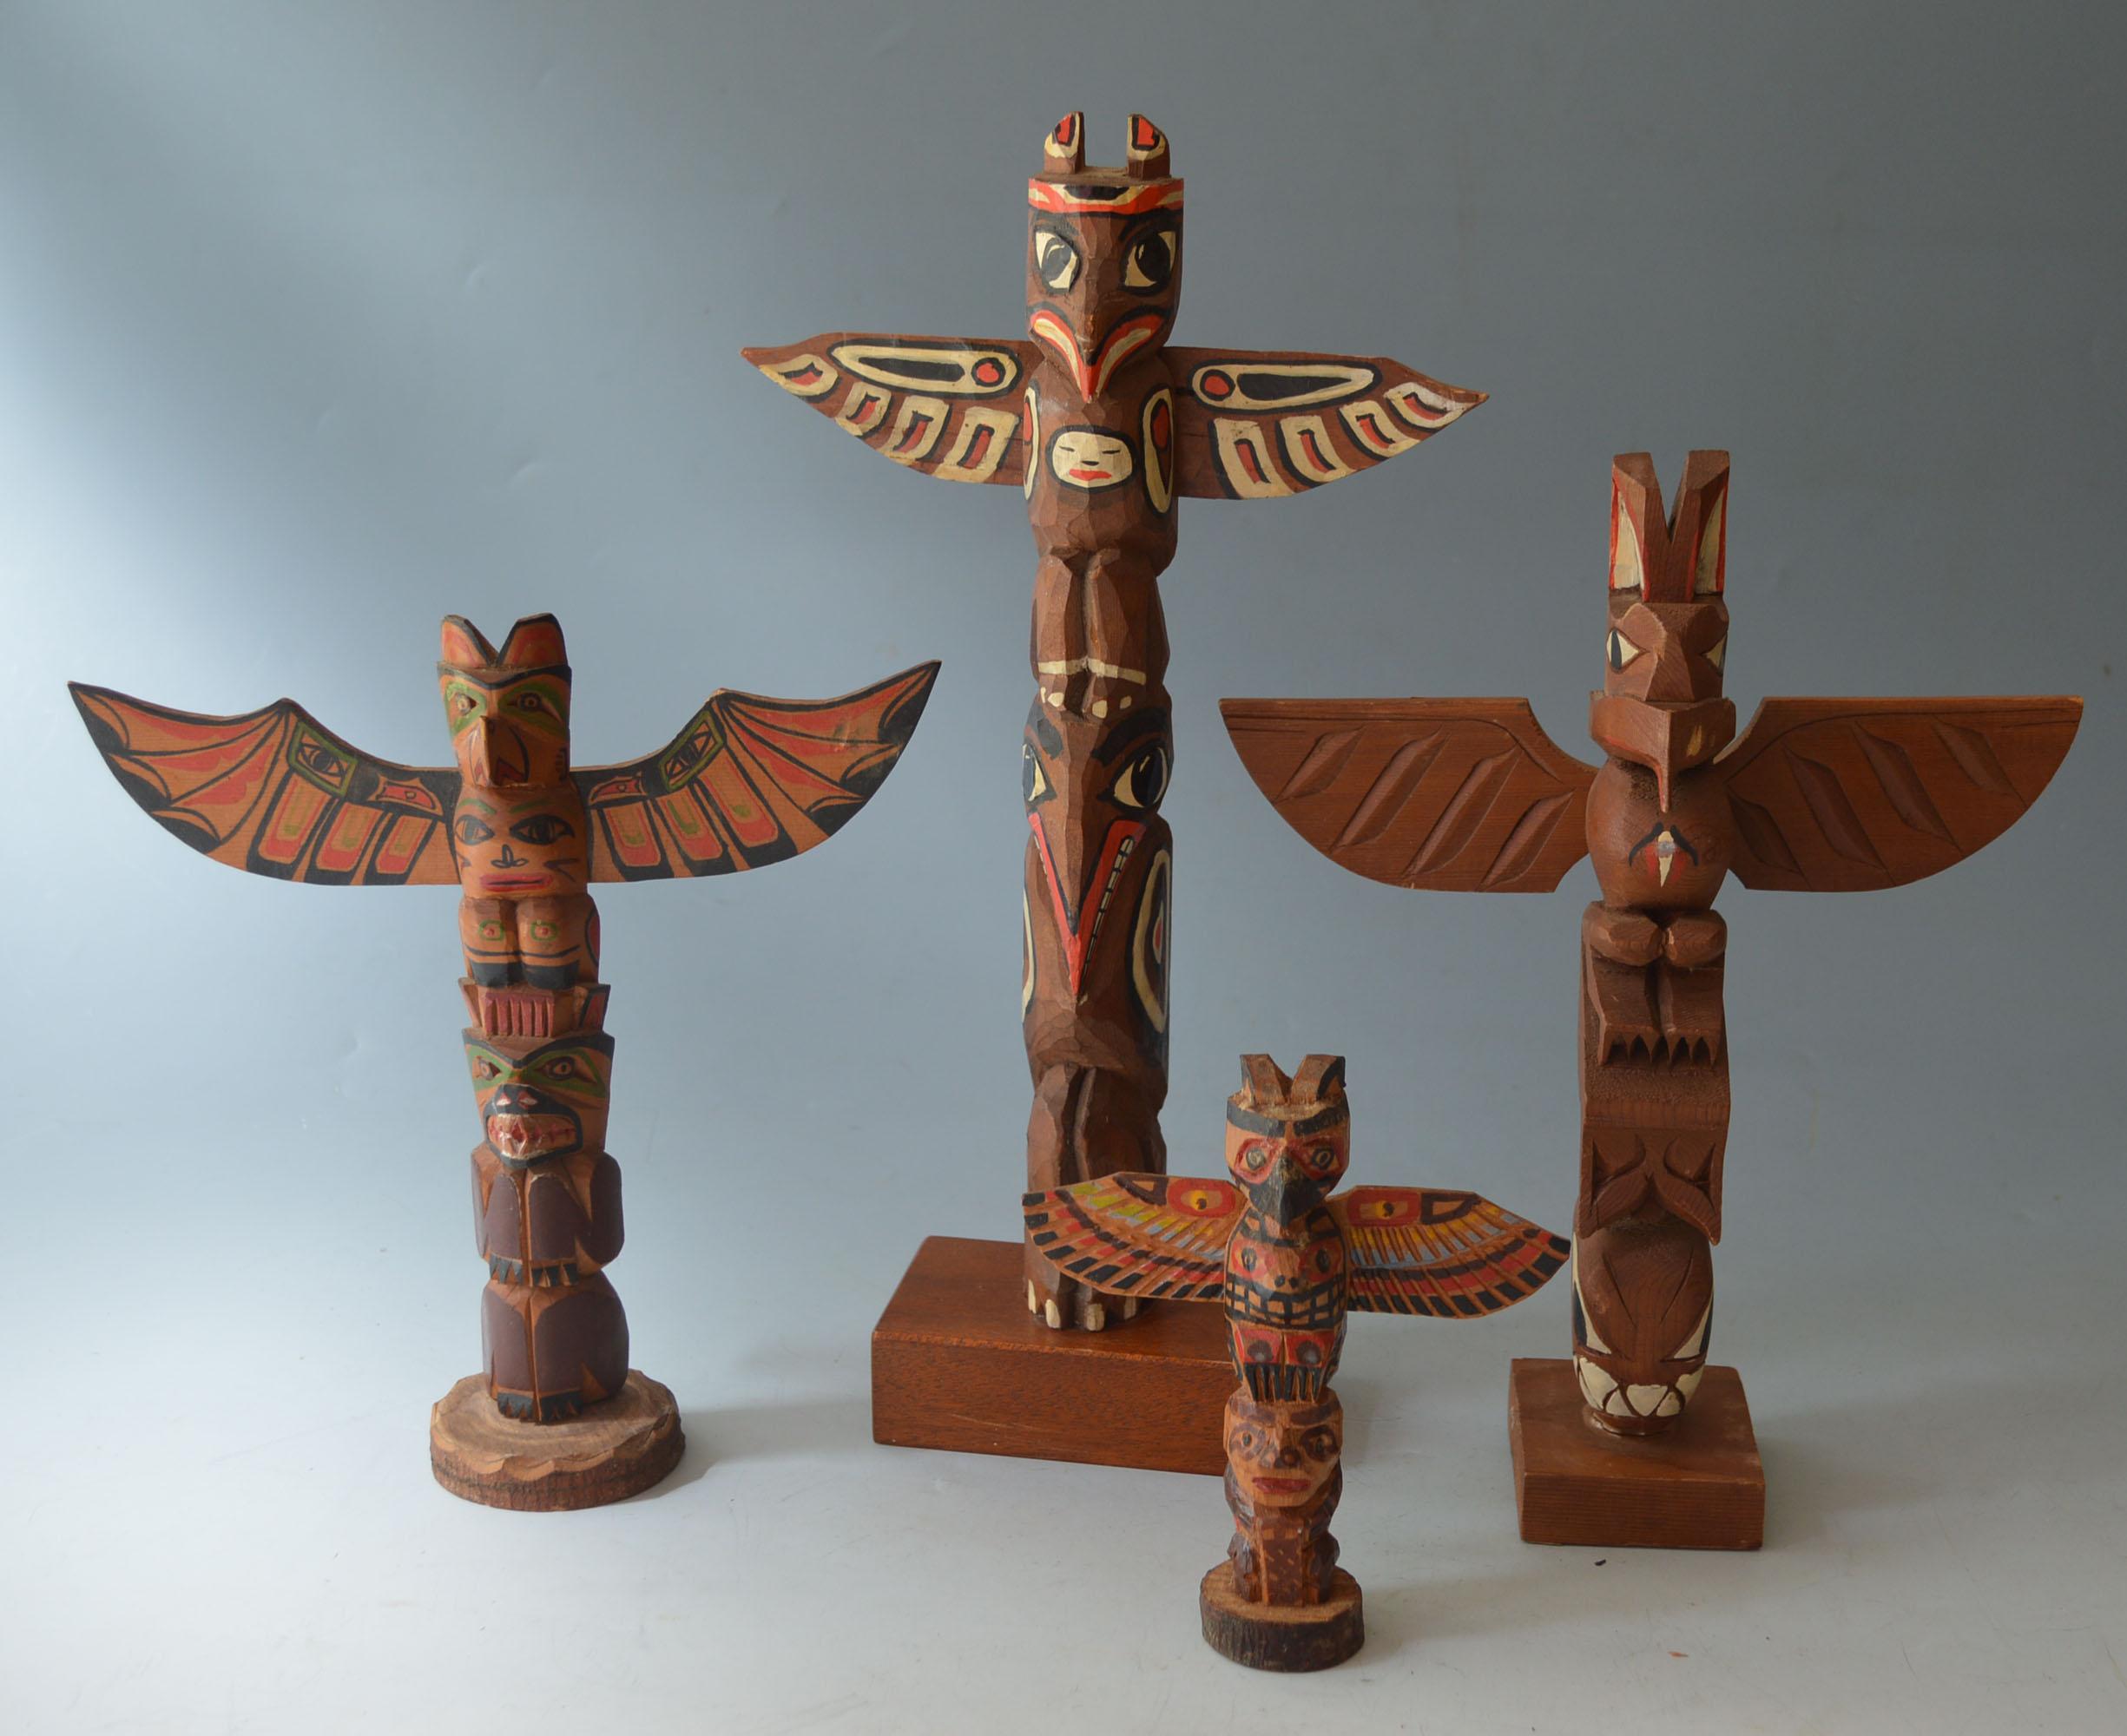 Native American North West Coast Totem Group Haida Tlingit
A group of 4 vintage carved and painted cedar wood totems
Vancouver BC signed my makers one dated 1966 
Measures: height 31, 24, 21, 13 cm size not inc base
12.5 inches
9.5 inches
8.5